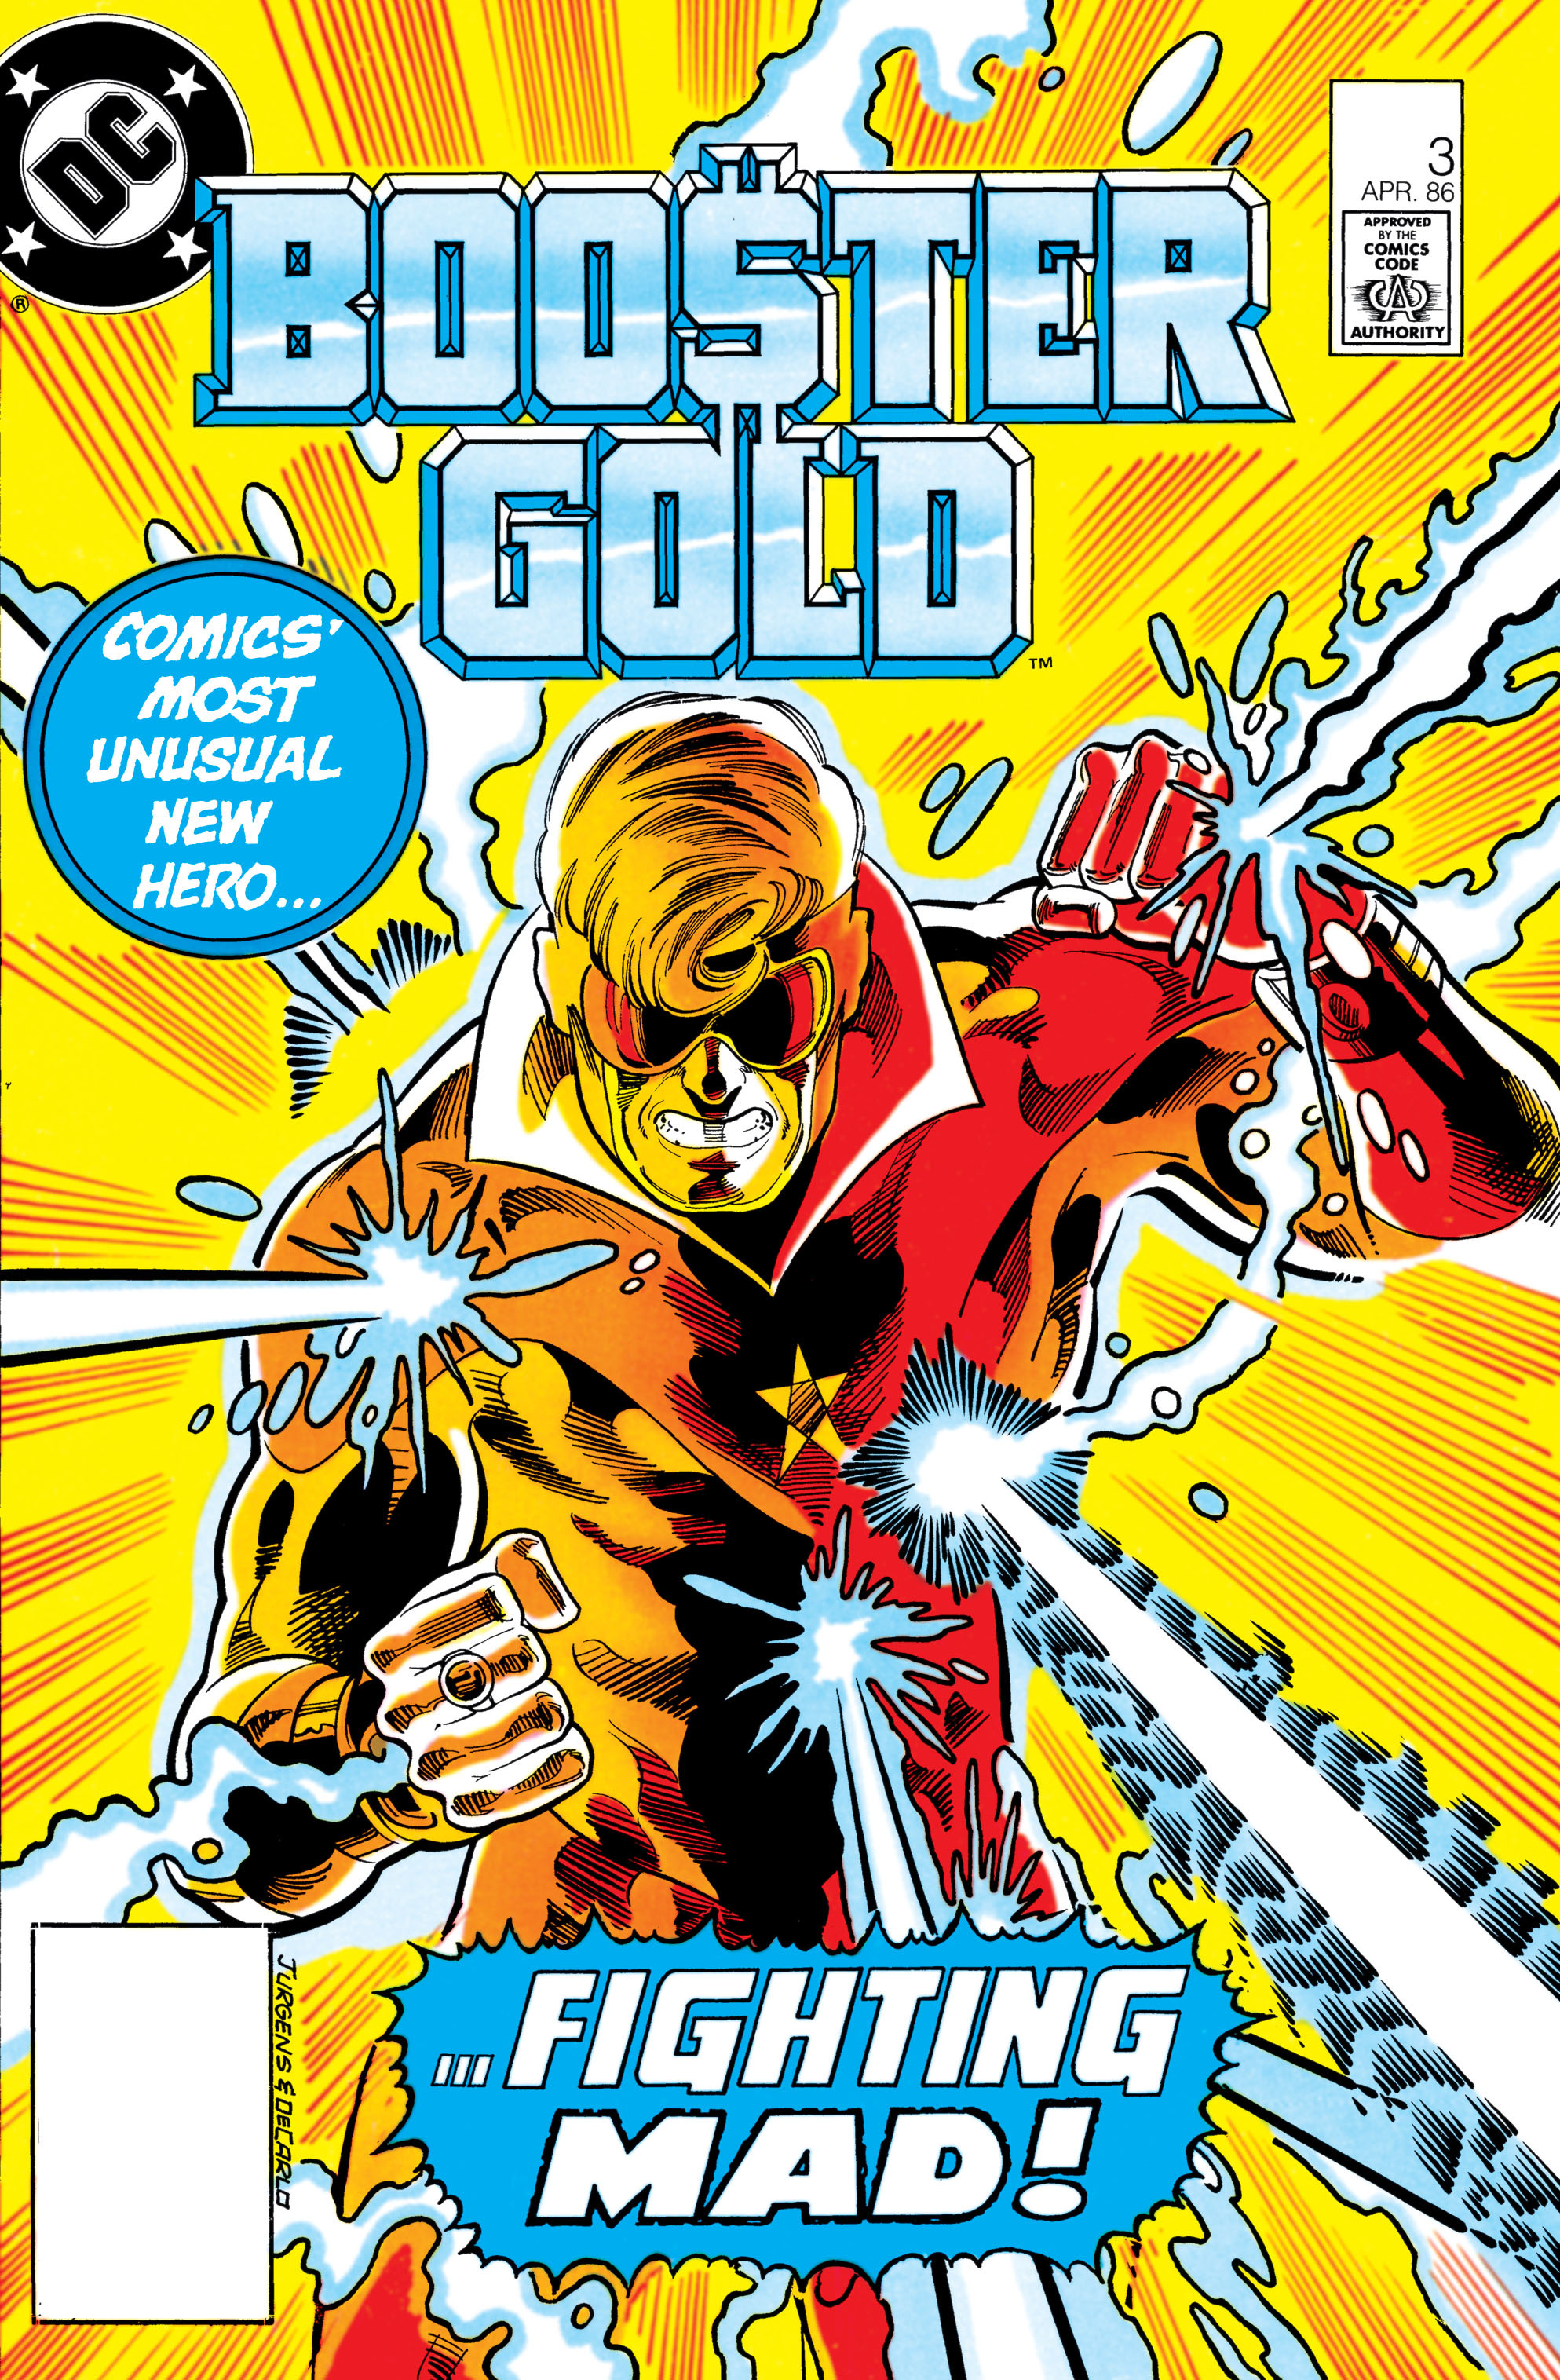 Read online Booster Gold (1986) comic -  Issue #3 - 1